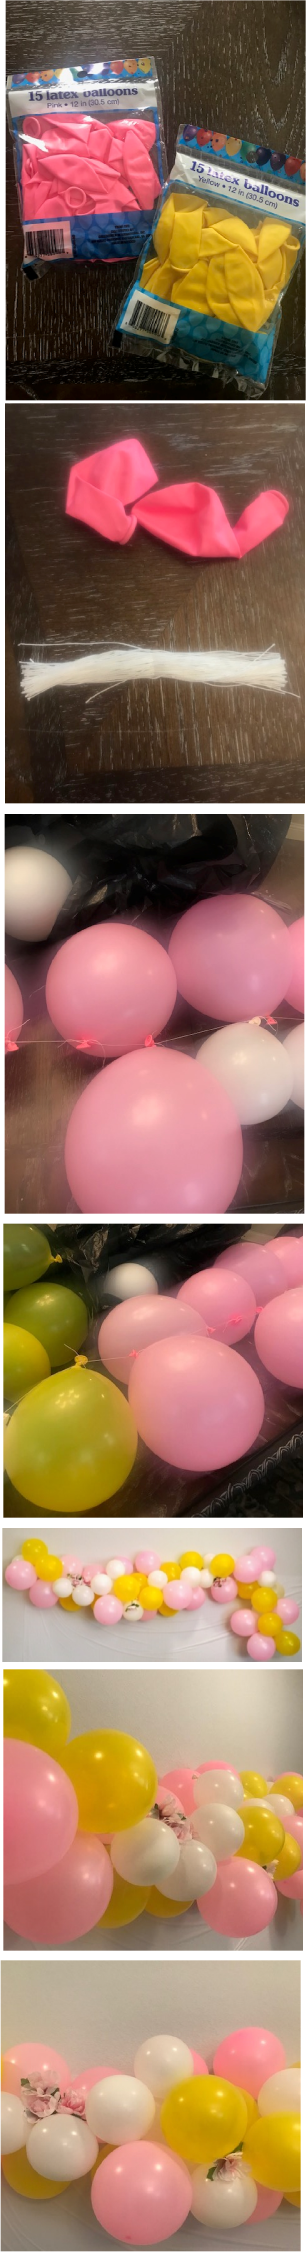 balloon garland step by step instruction pictures